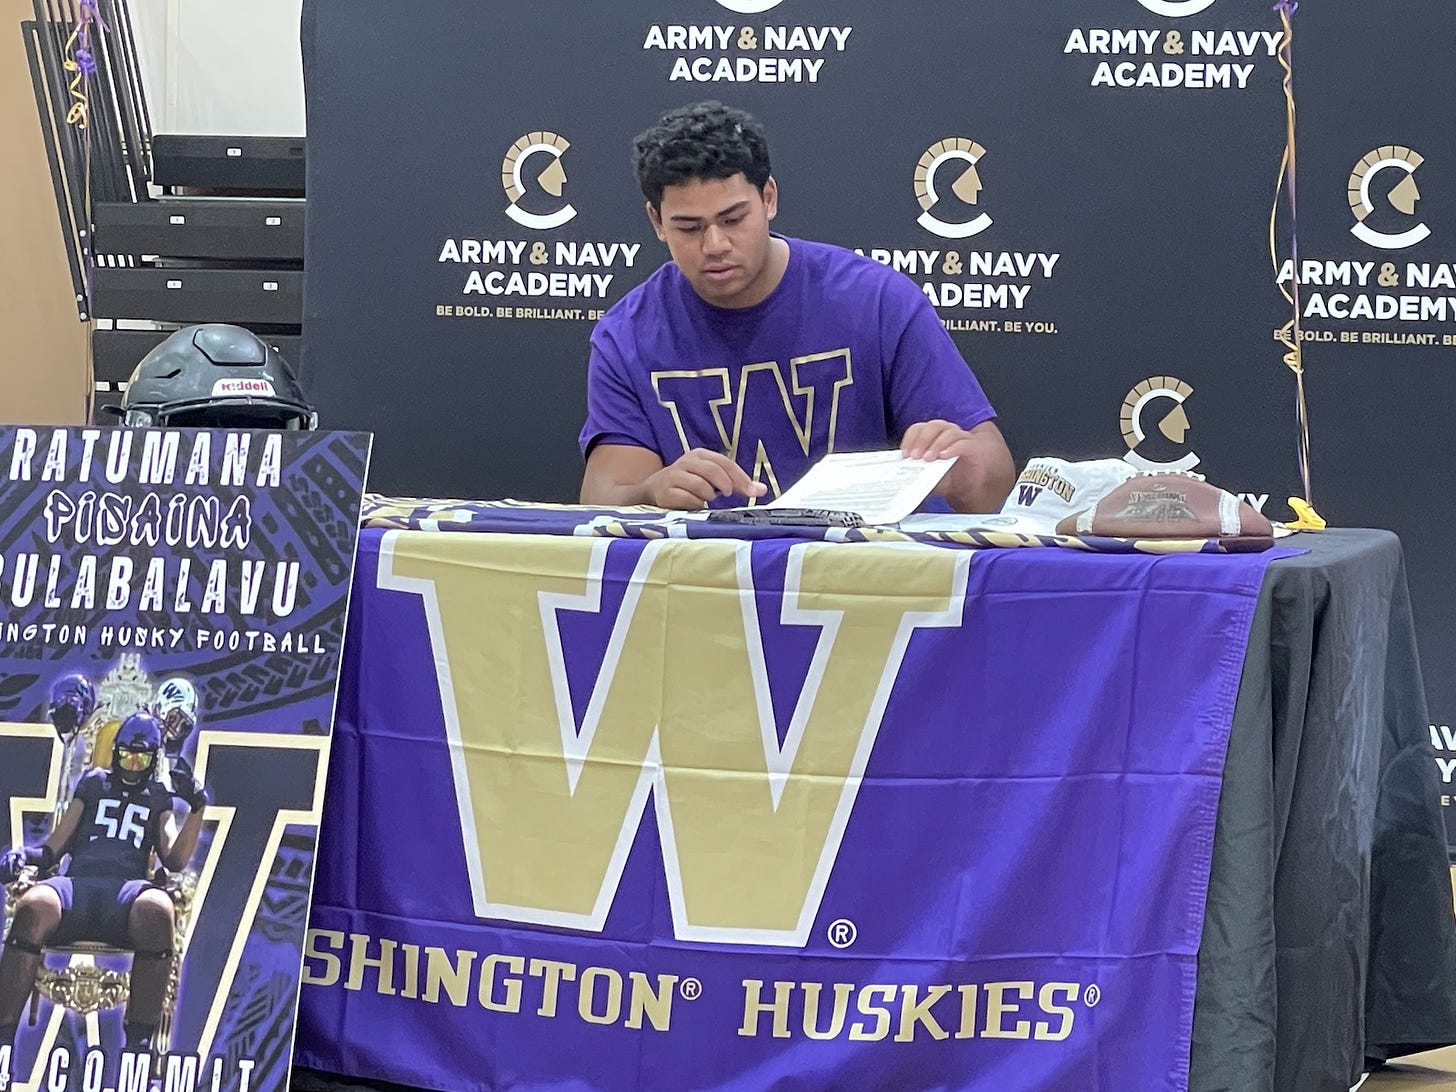 Ratumana “Mana” Bulabalavu of the Army-Navy Academy signs his National Letter of Intent on Wednesday to play college football at the University of Washington. Steve Puterski photo